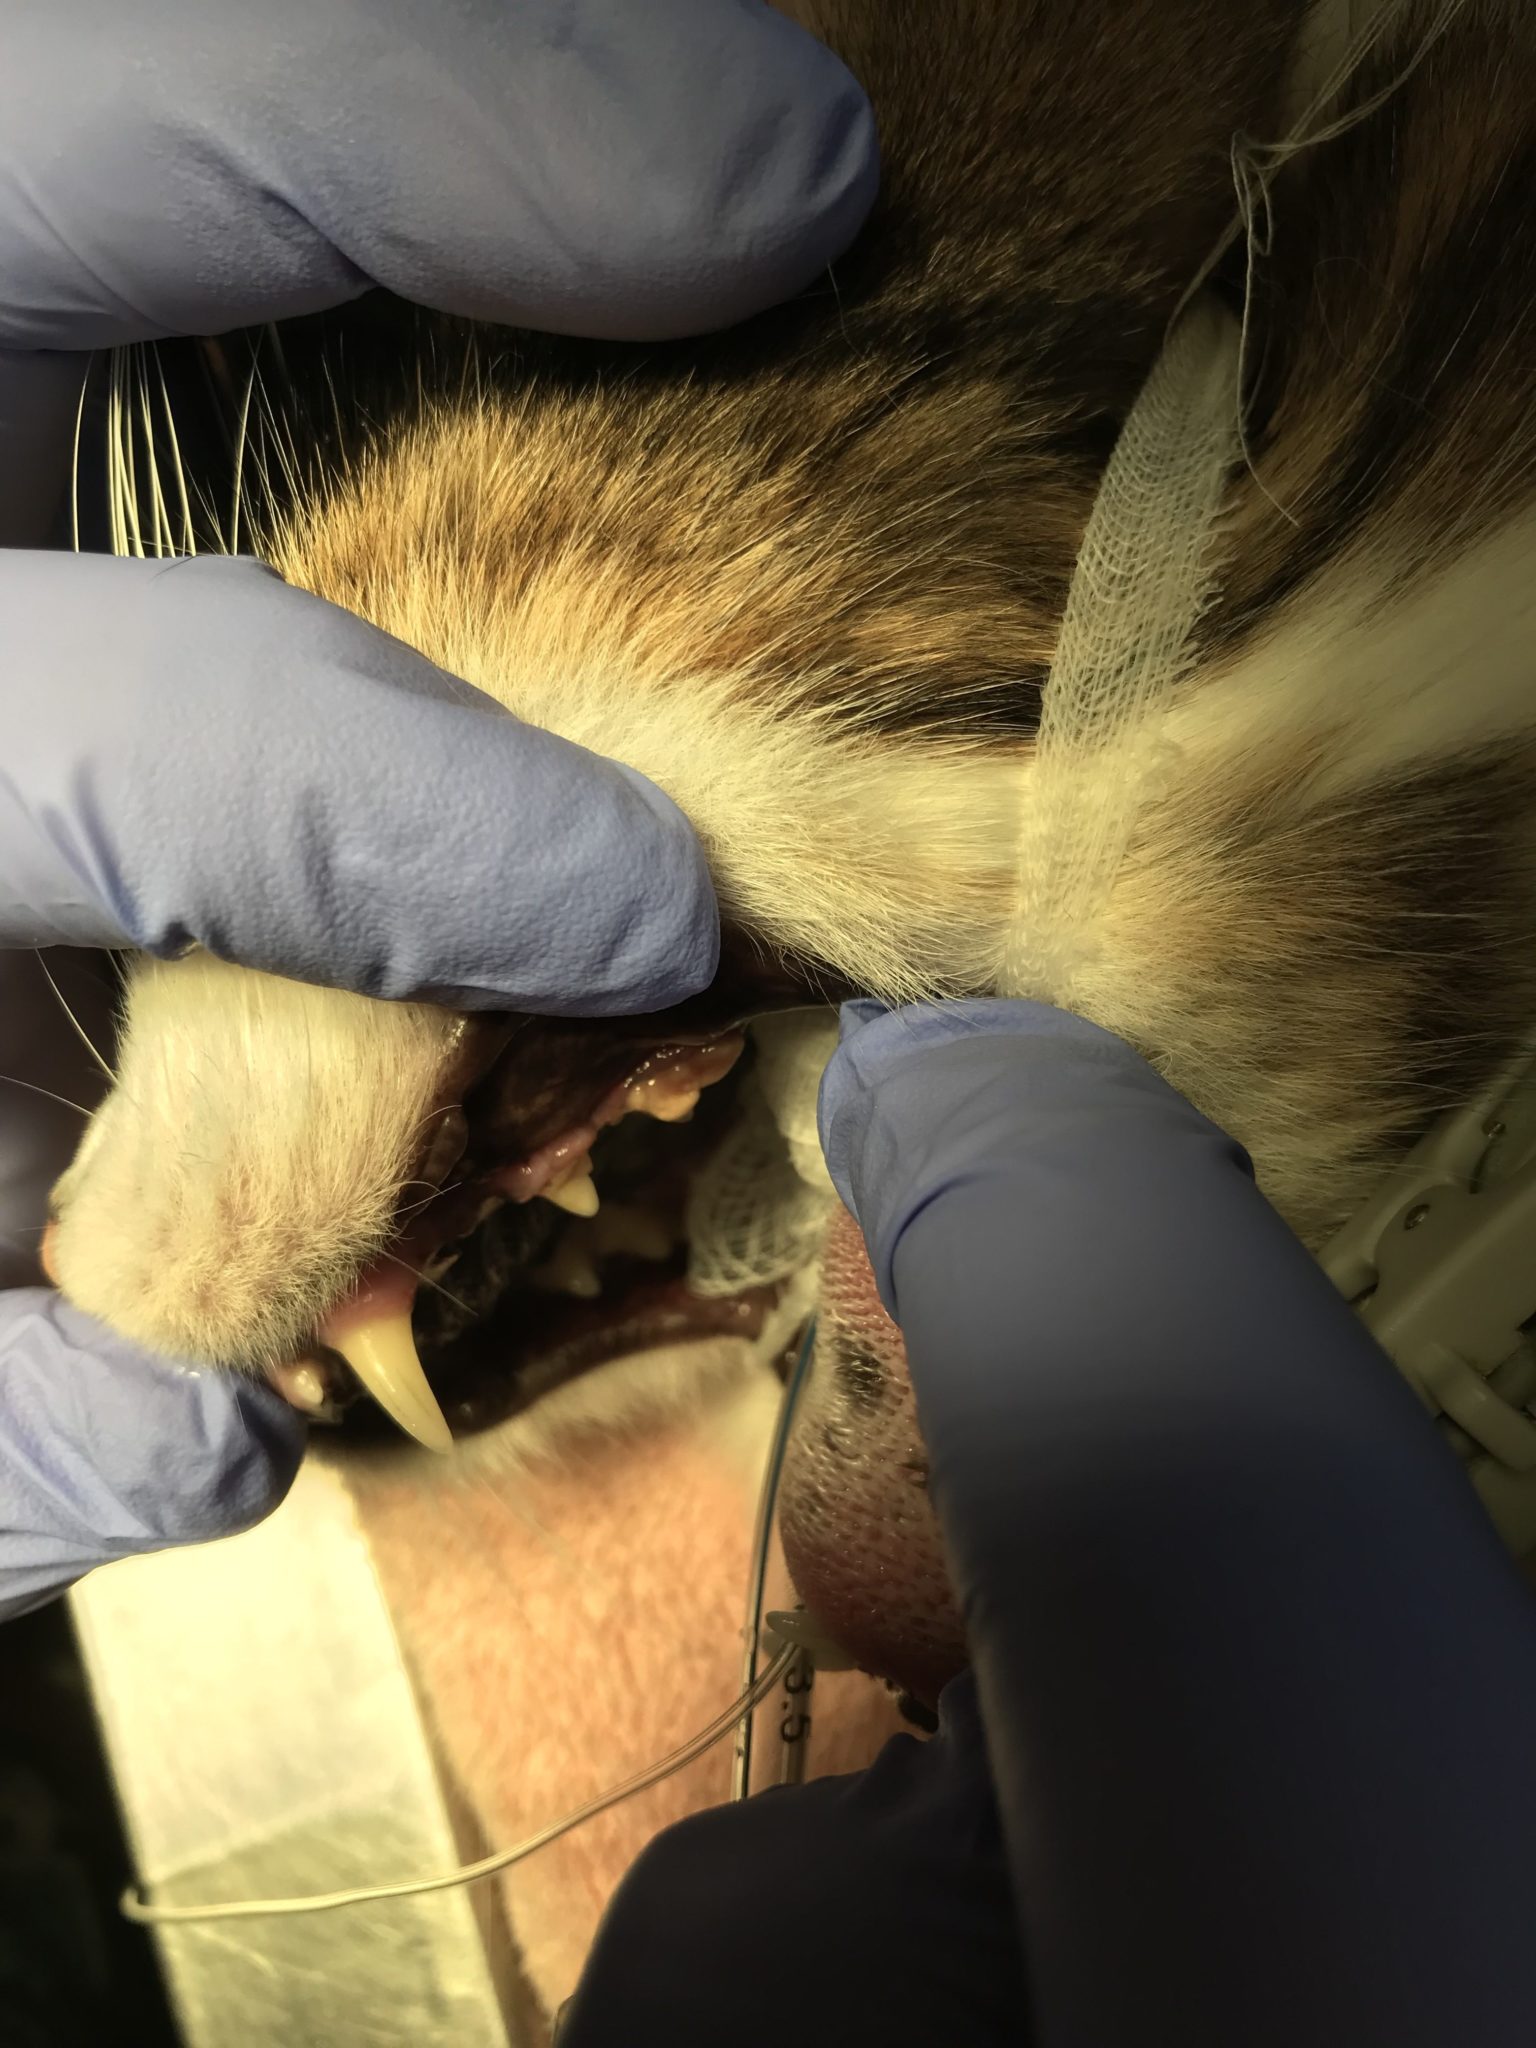 Routine Dental Cleaning and Extraction of a Broken Tooth in an 8 Year